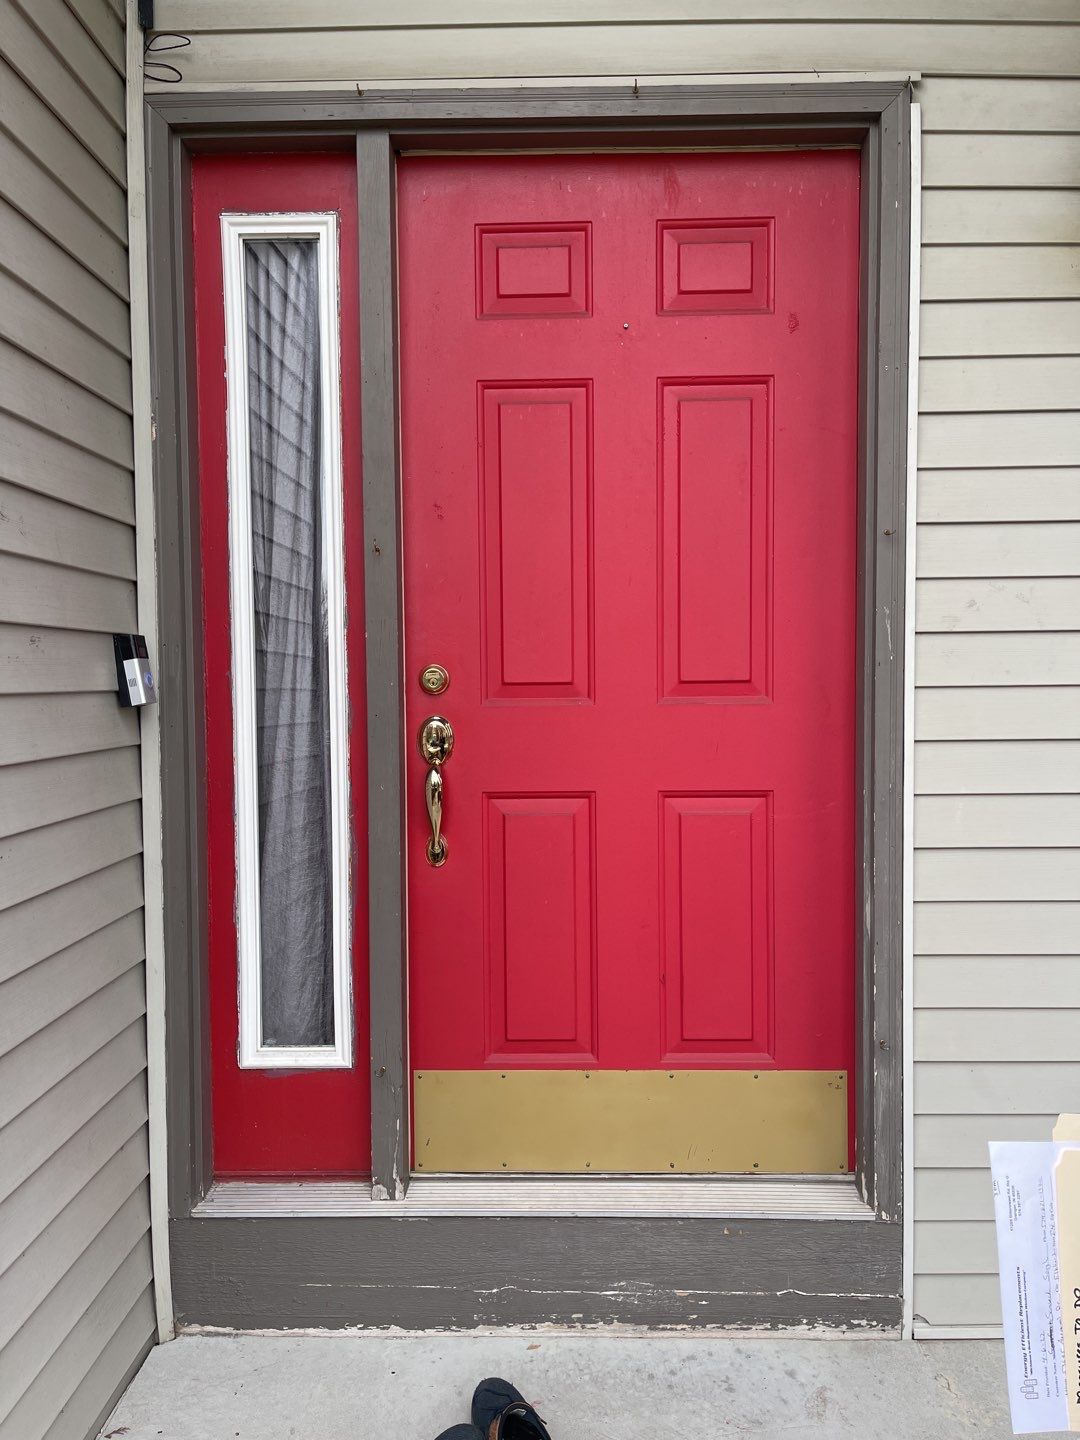 A bright red entry door in Granger, Indiana.